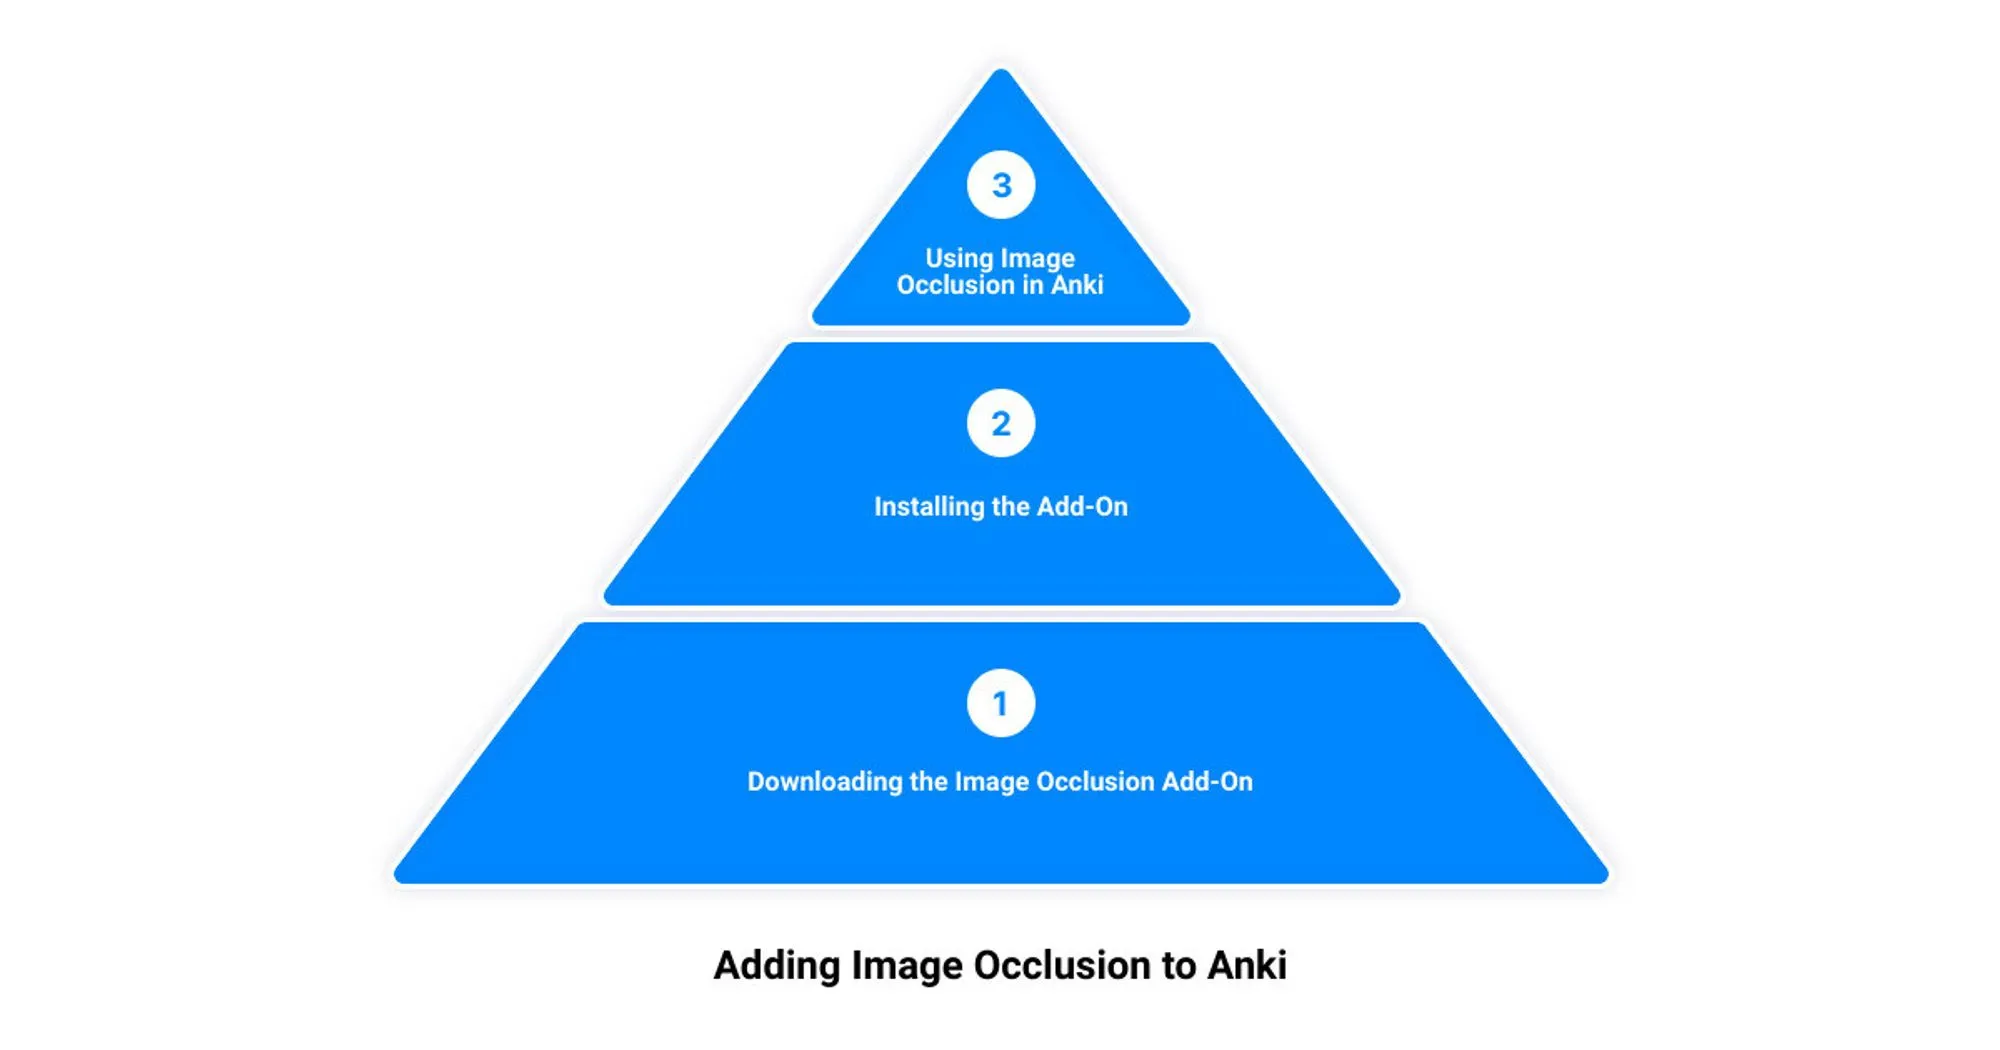 Unleash the Power of Anki with Mind-Blowing Image Occlusion Add-On